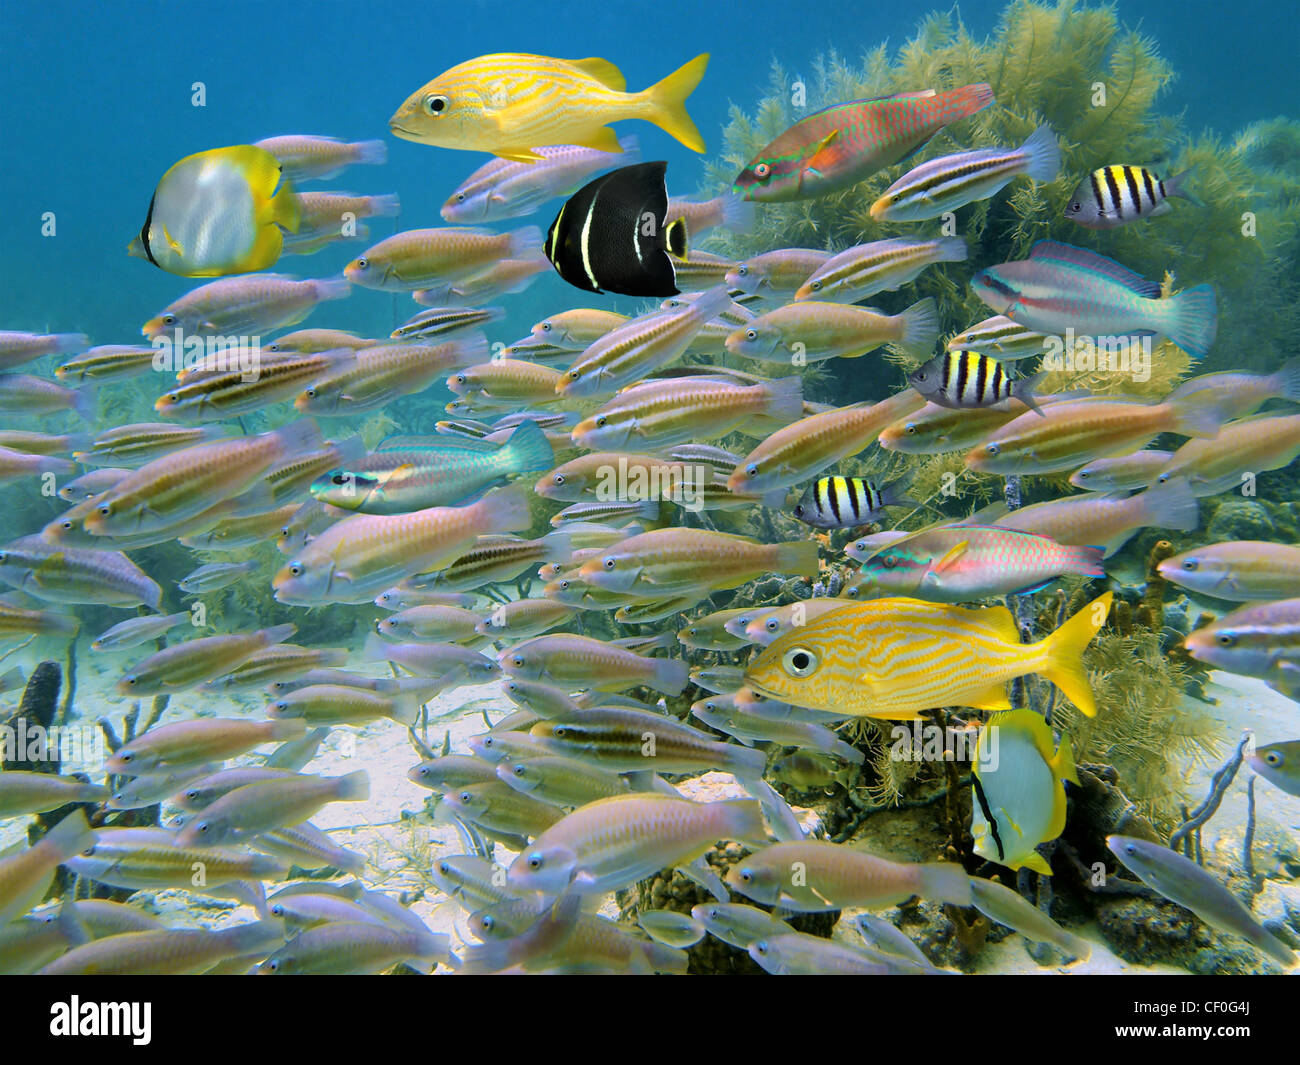 Tropical reef fish school, mostly striped parrotfish, underwater in the Caribbean sea Stock Photo